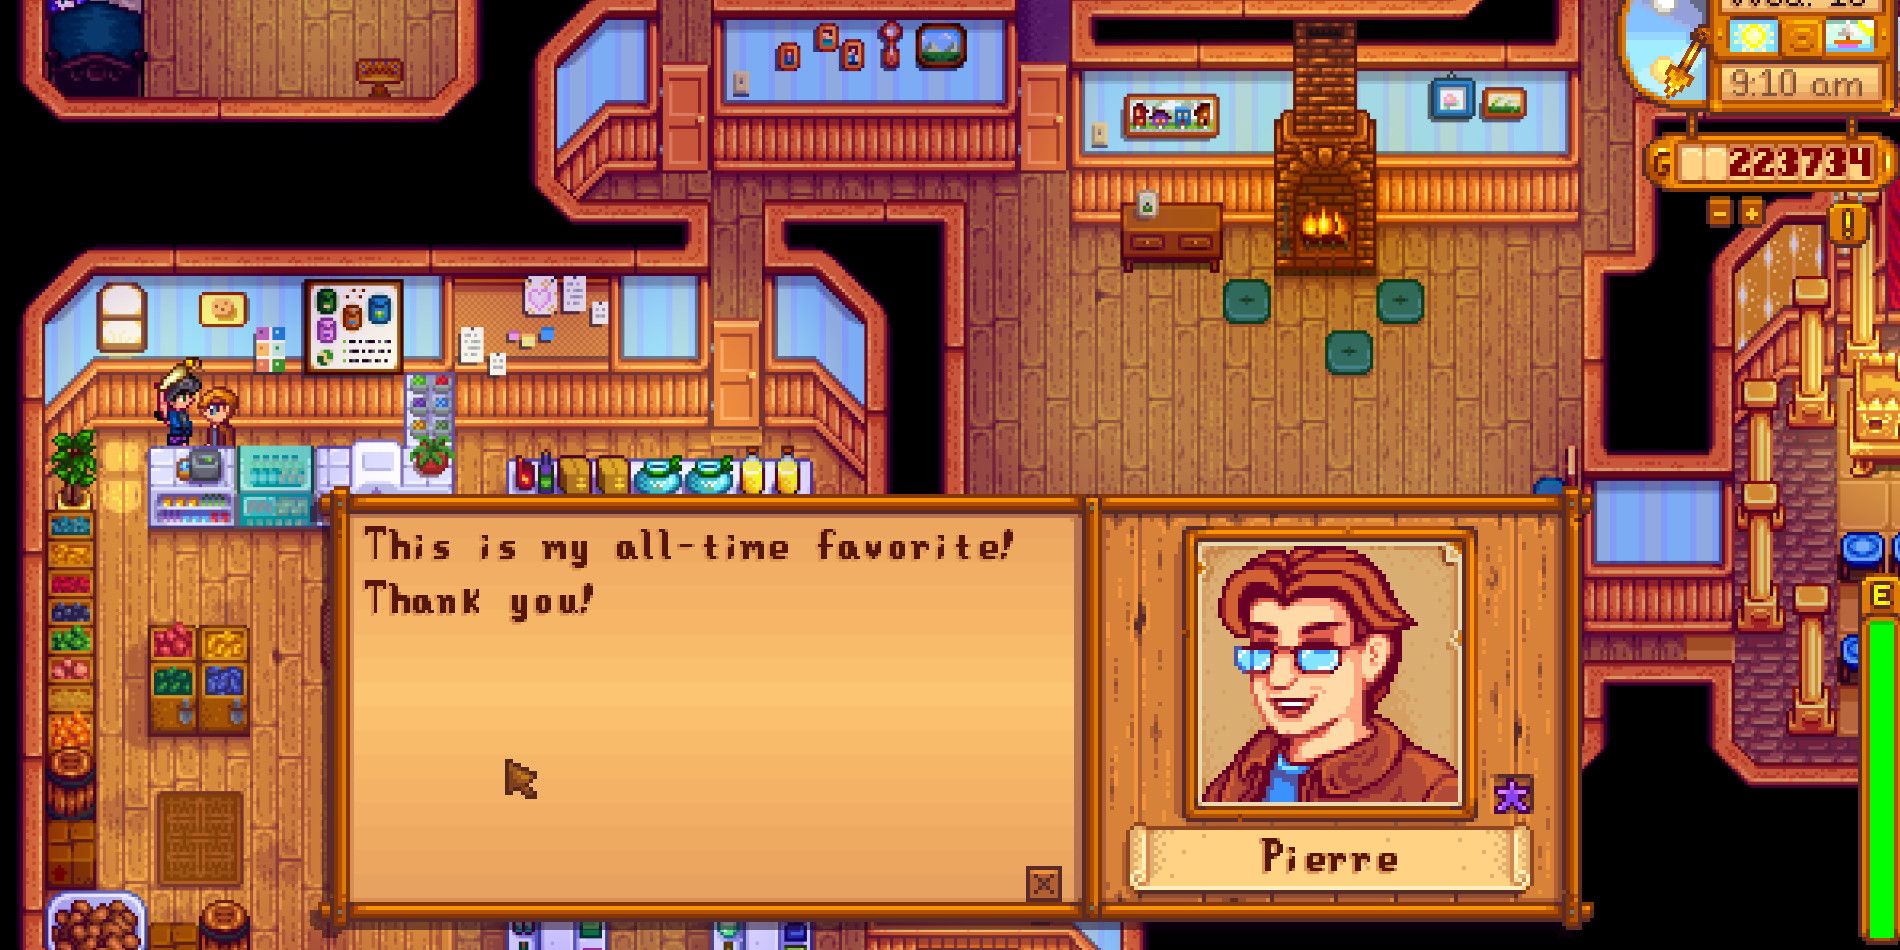 Pierre in Stardew Valley saying "Thank you!" after receiving a Rabbit's Foot as a gift